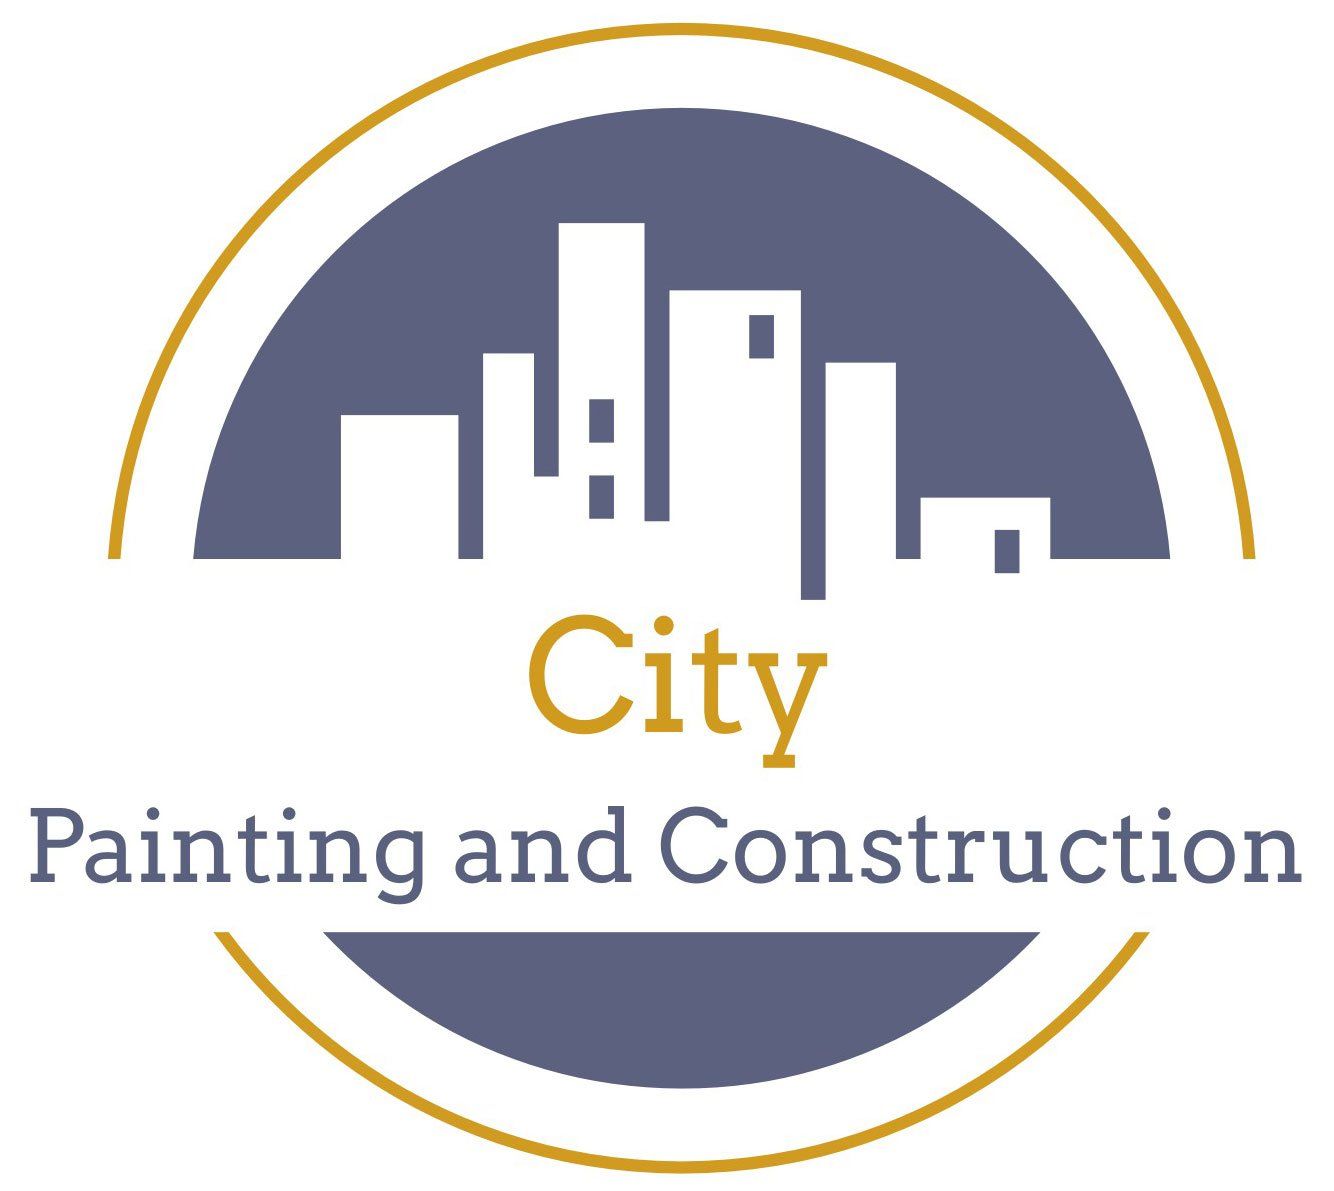 City Painting and Construction